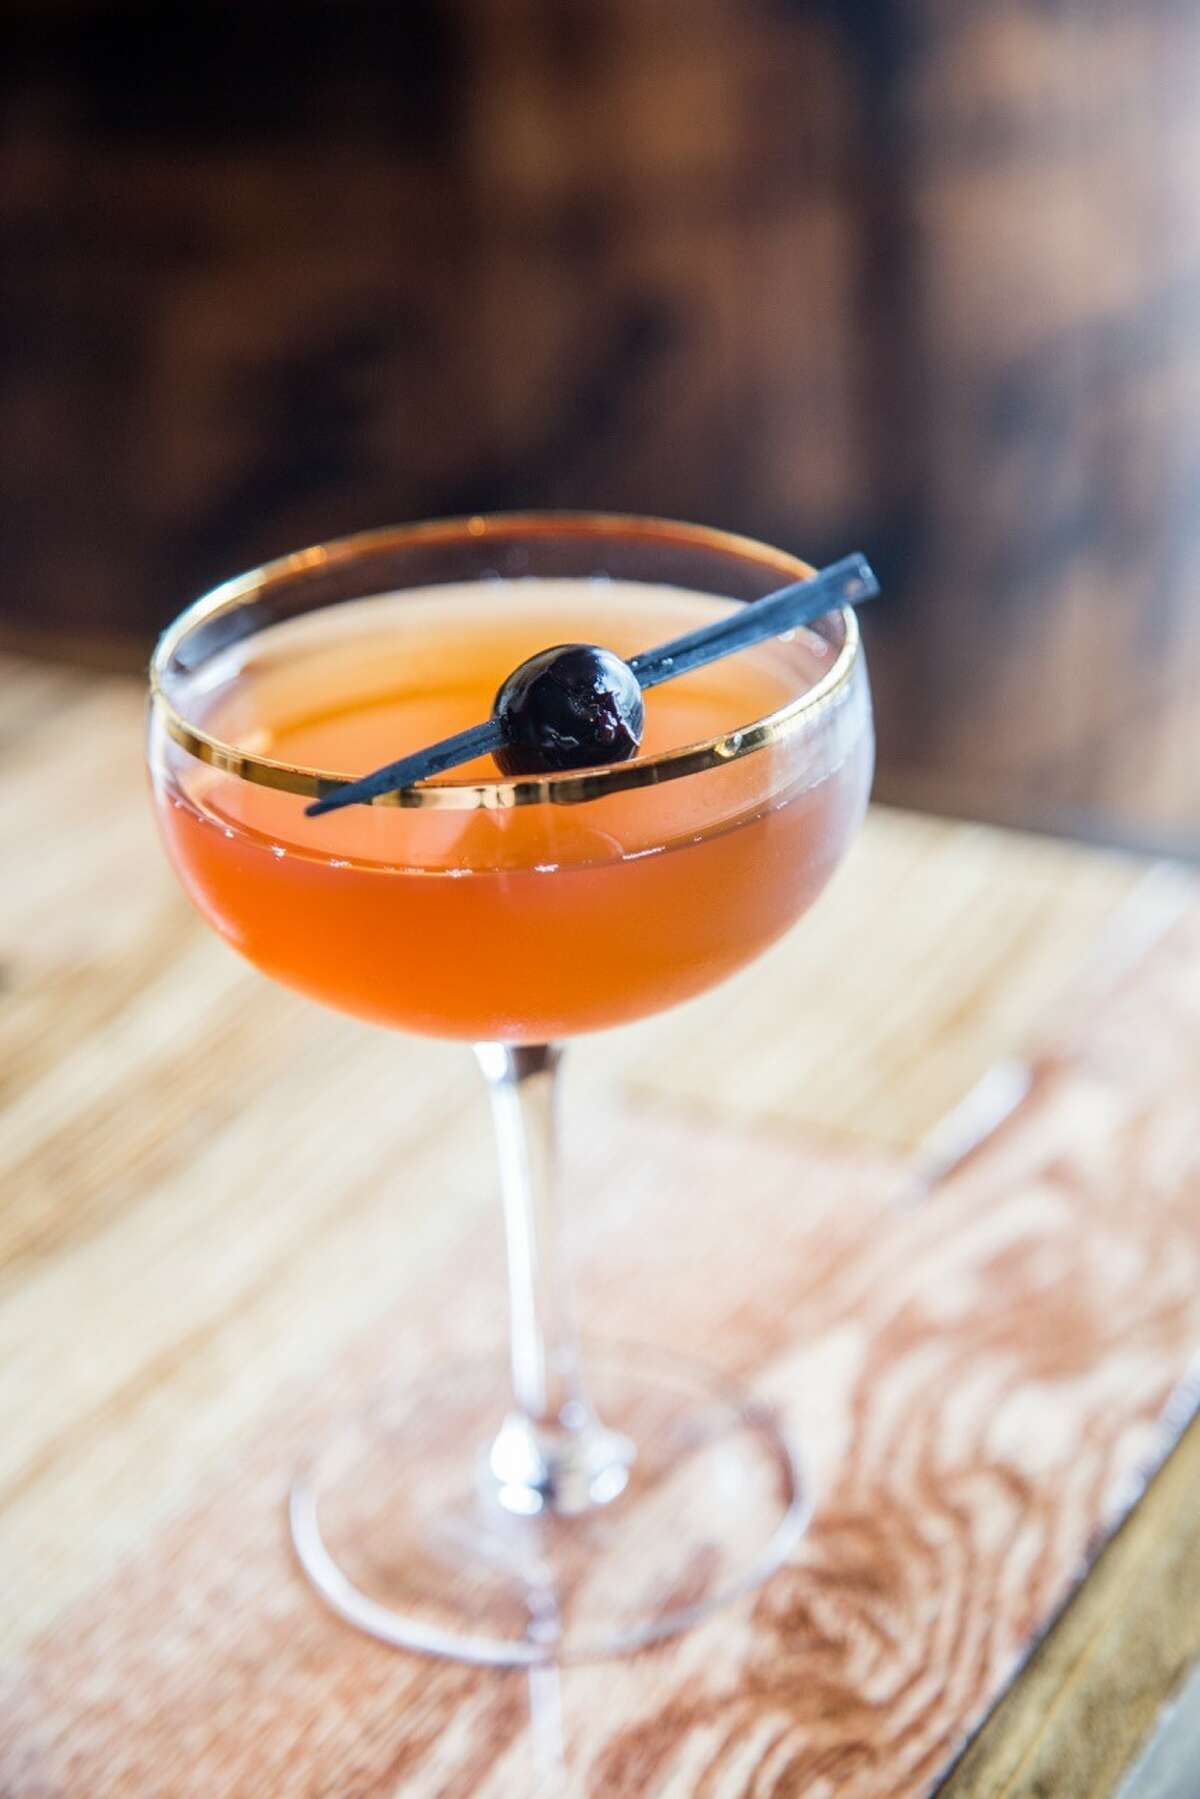 Sweet Bromance is a cocktail made with Suntory Toki whiskey, hibiscus liqueur, port and amaro at Reserve 101 bar in downtown Houston.